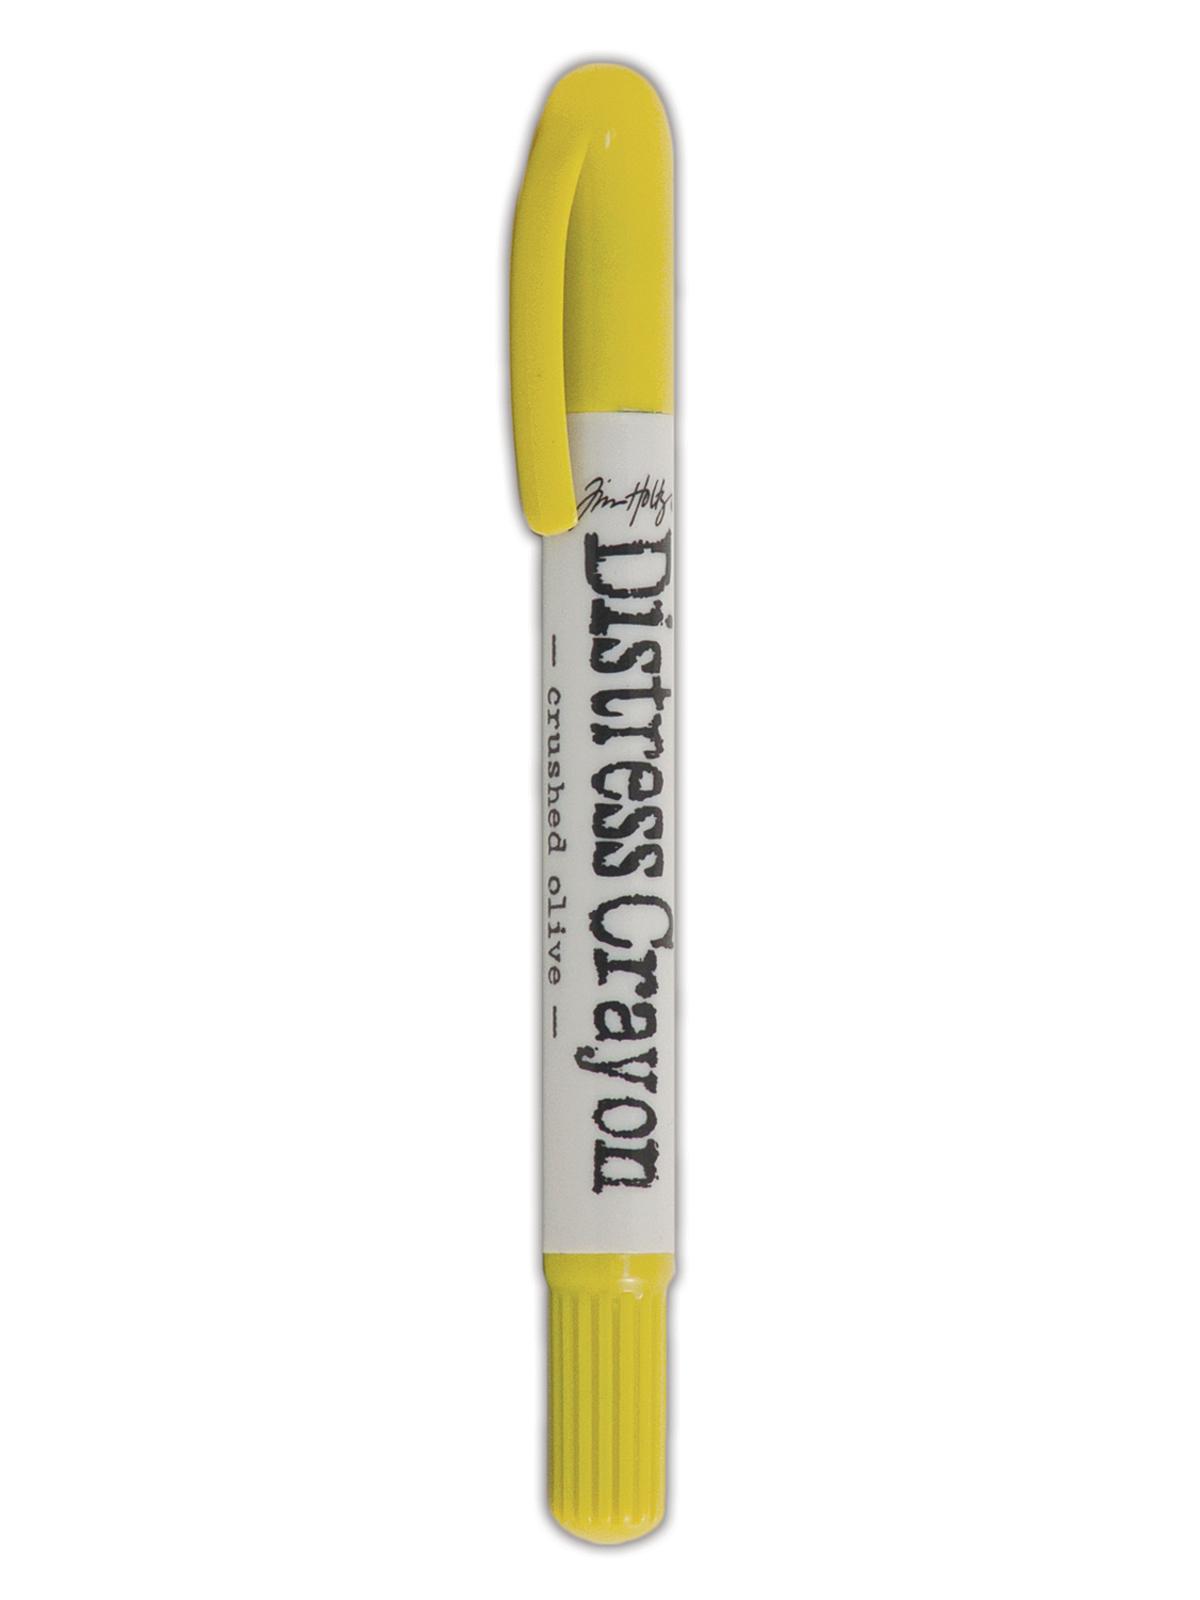 Distress Crayons Crushed Olive